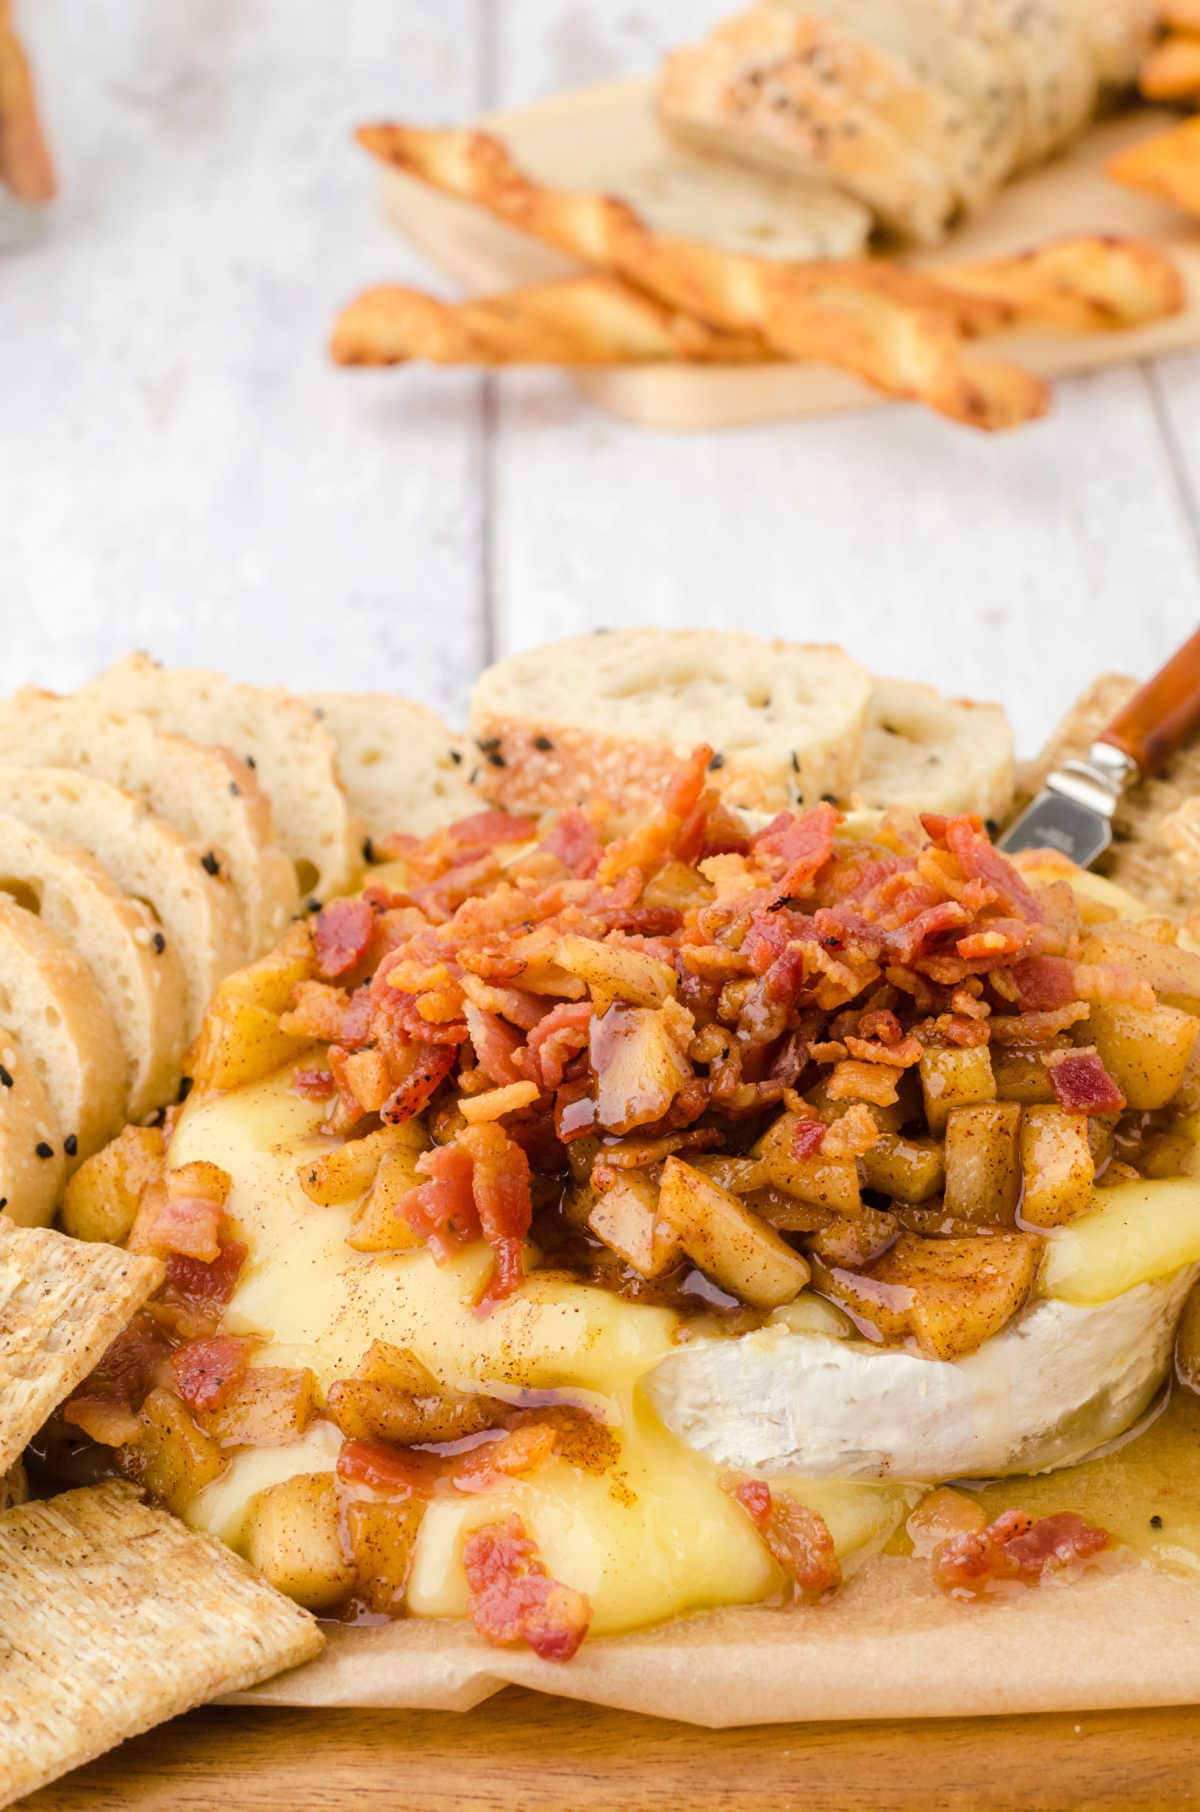 Baked Brie Cheese Appetizer with Apples & Bacon